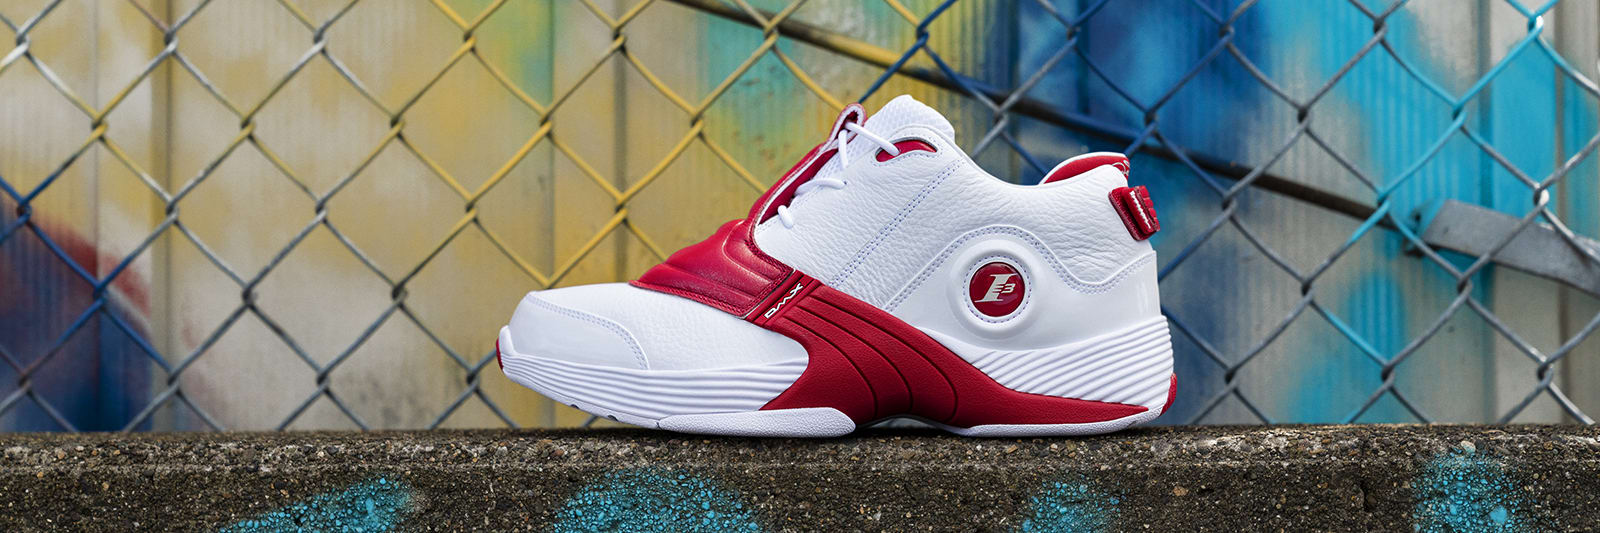 reebok question and answer